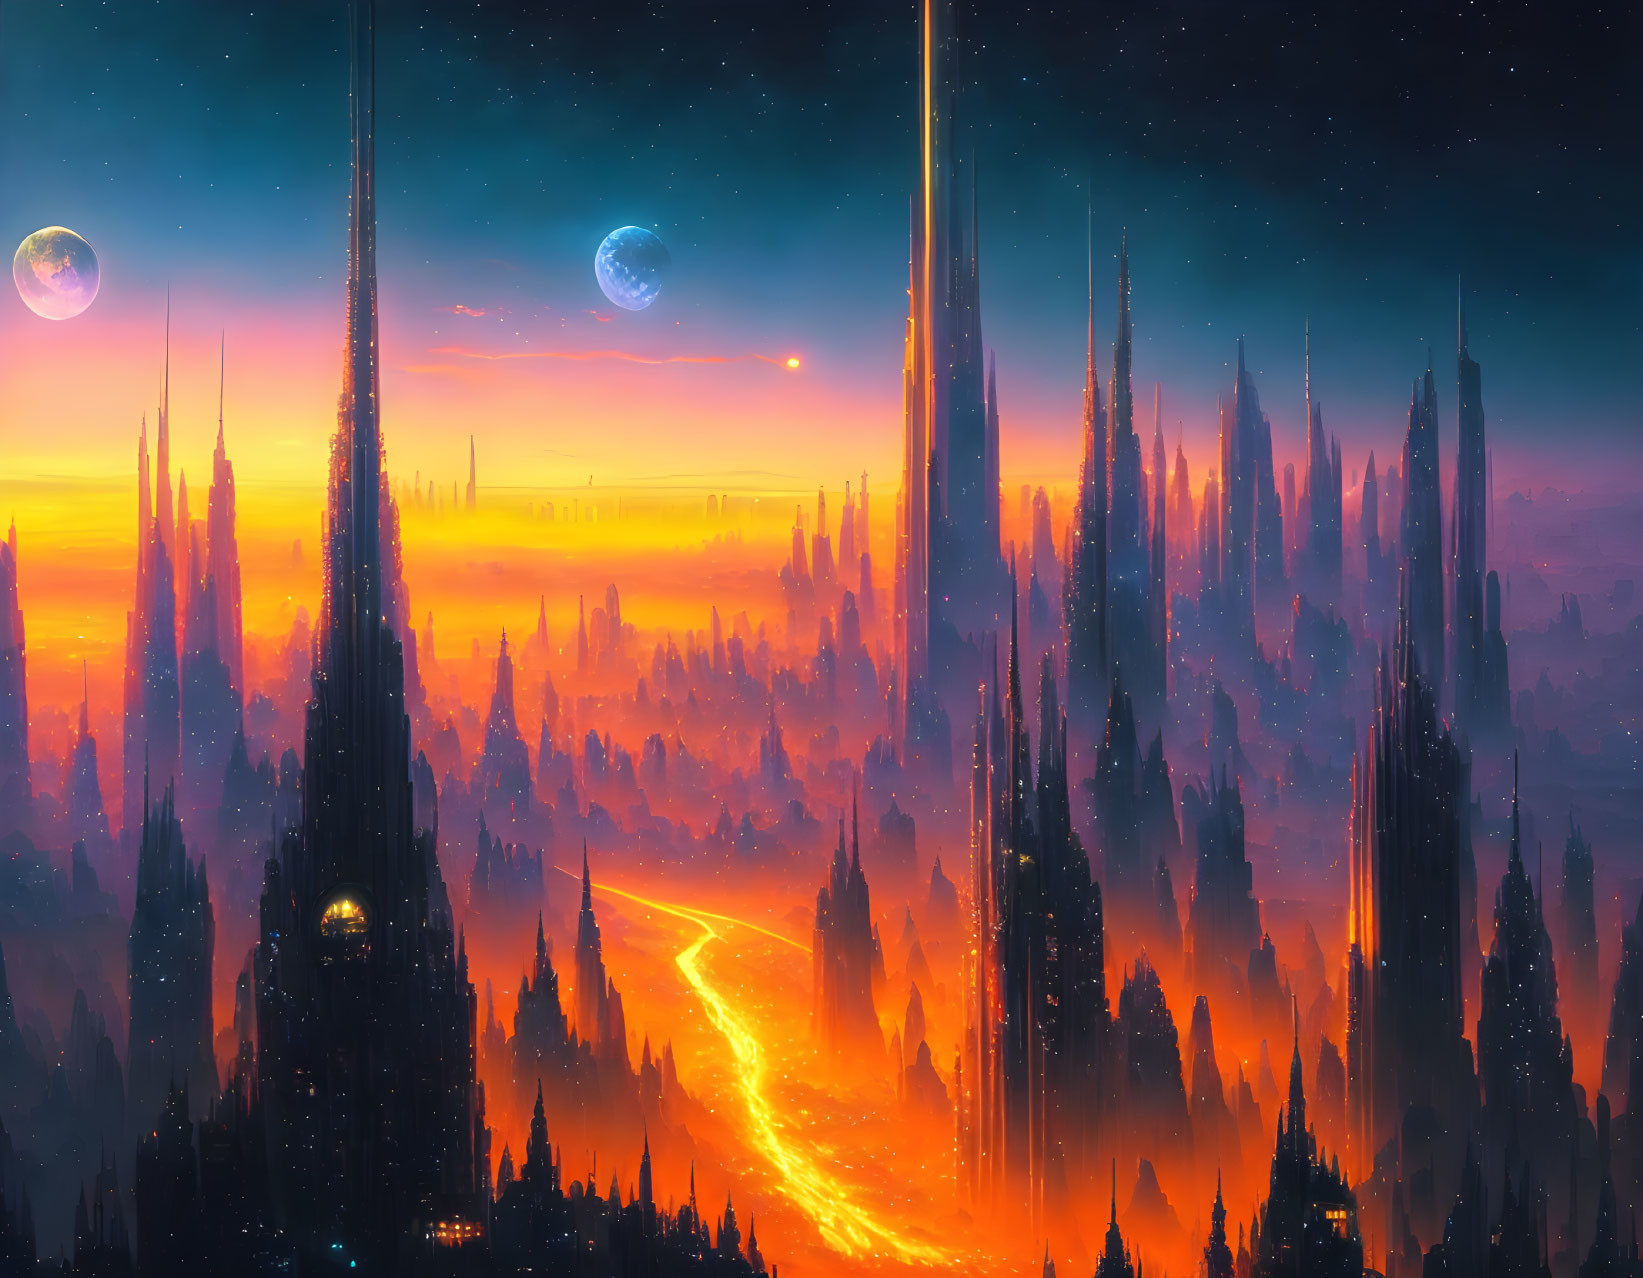 Futuristic cityscape with towering spires and lava rivers at sunset